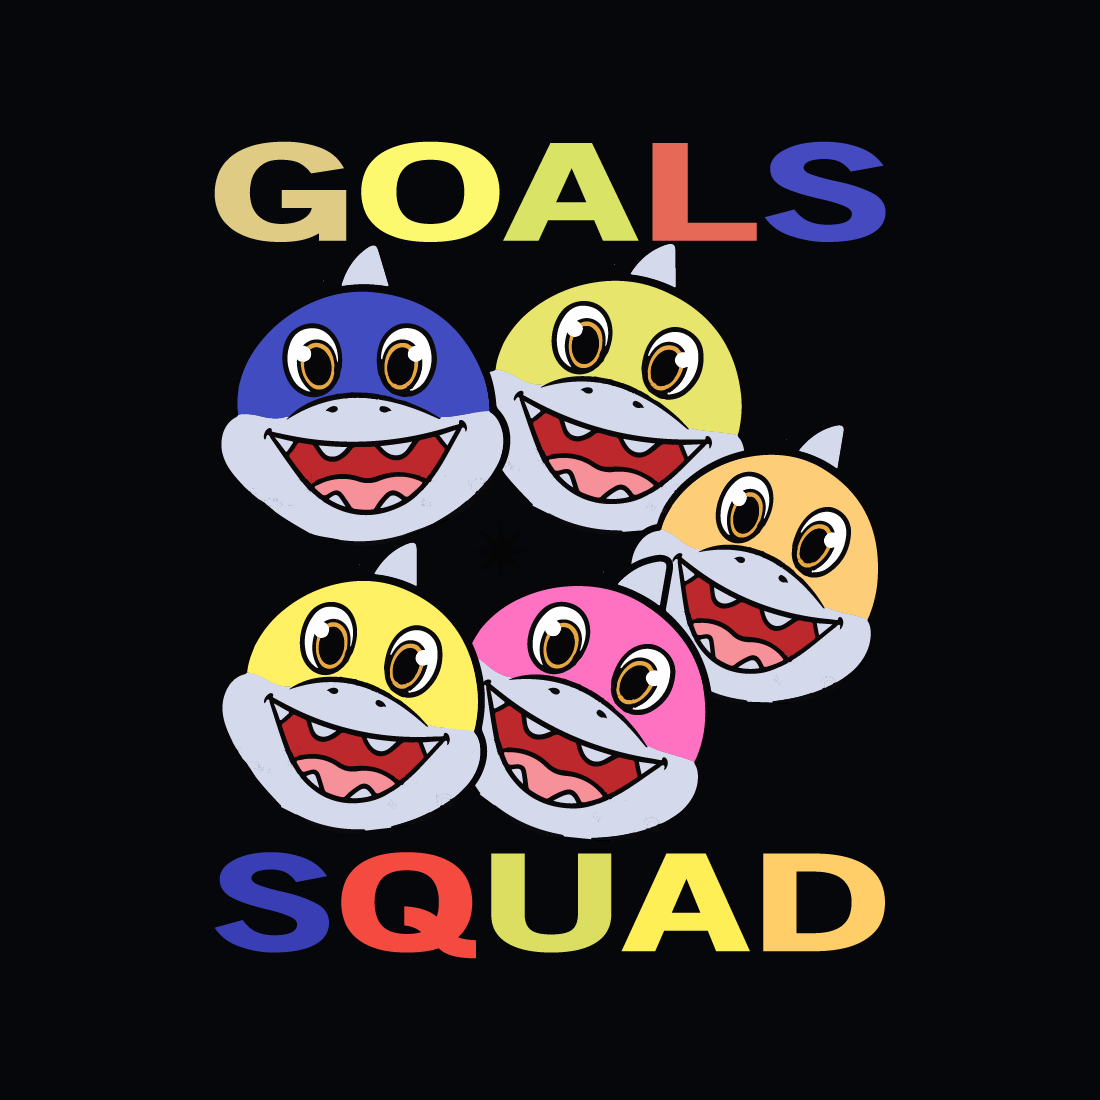 squad goals preview image.